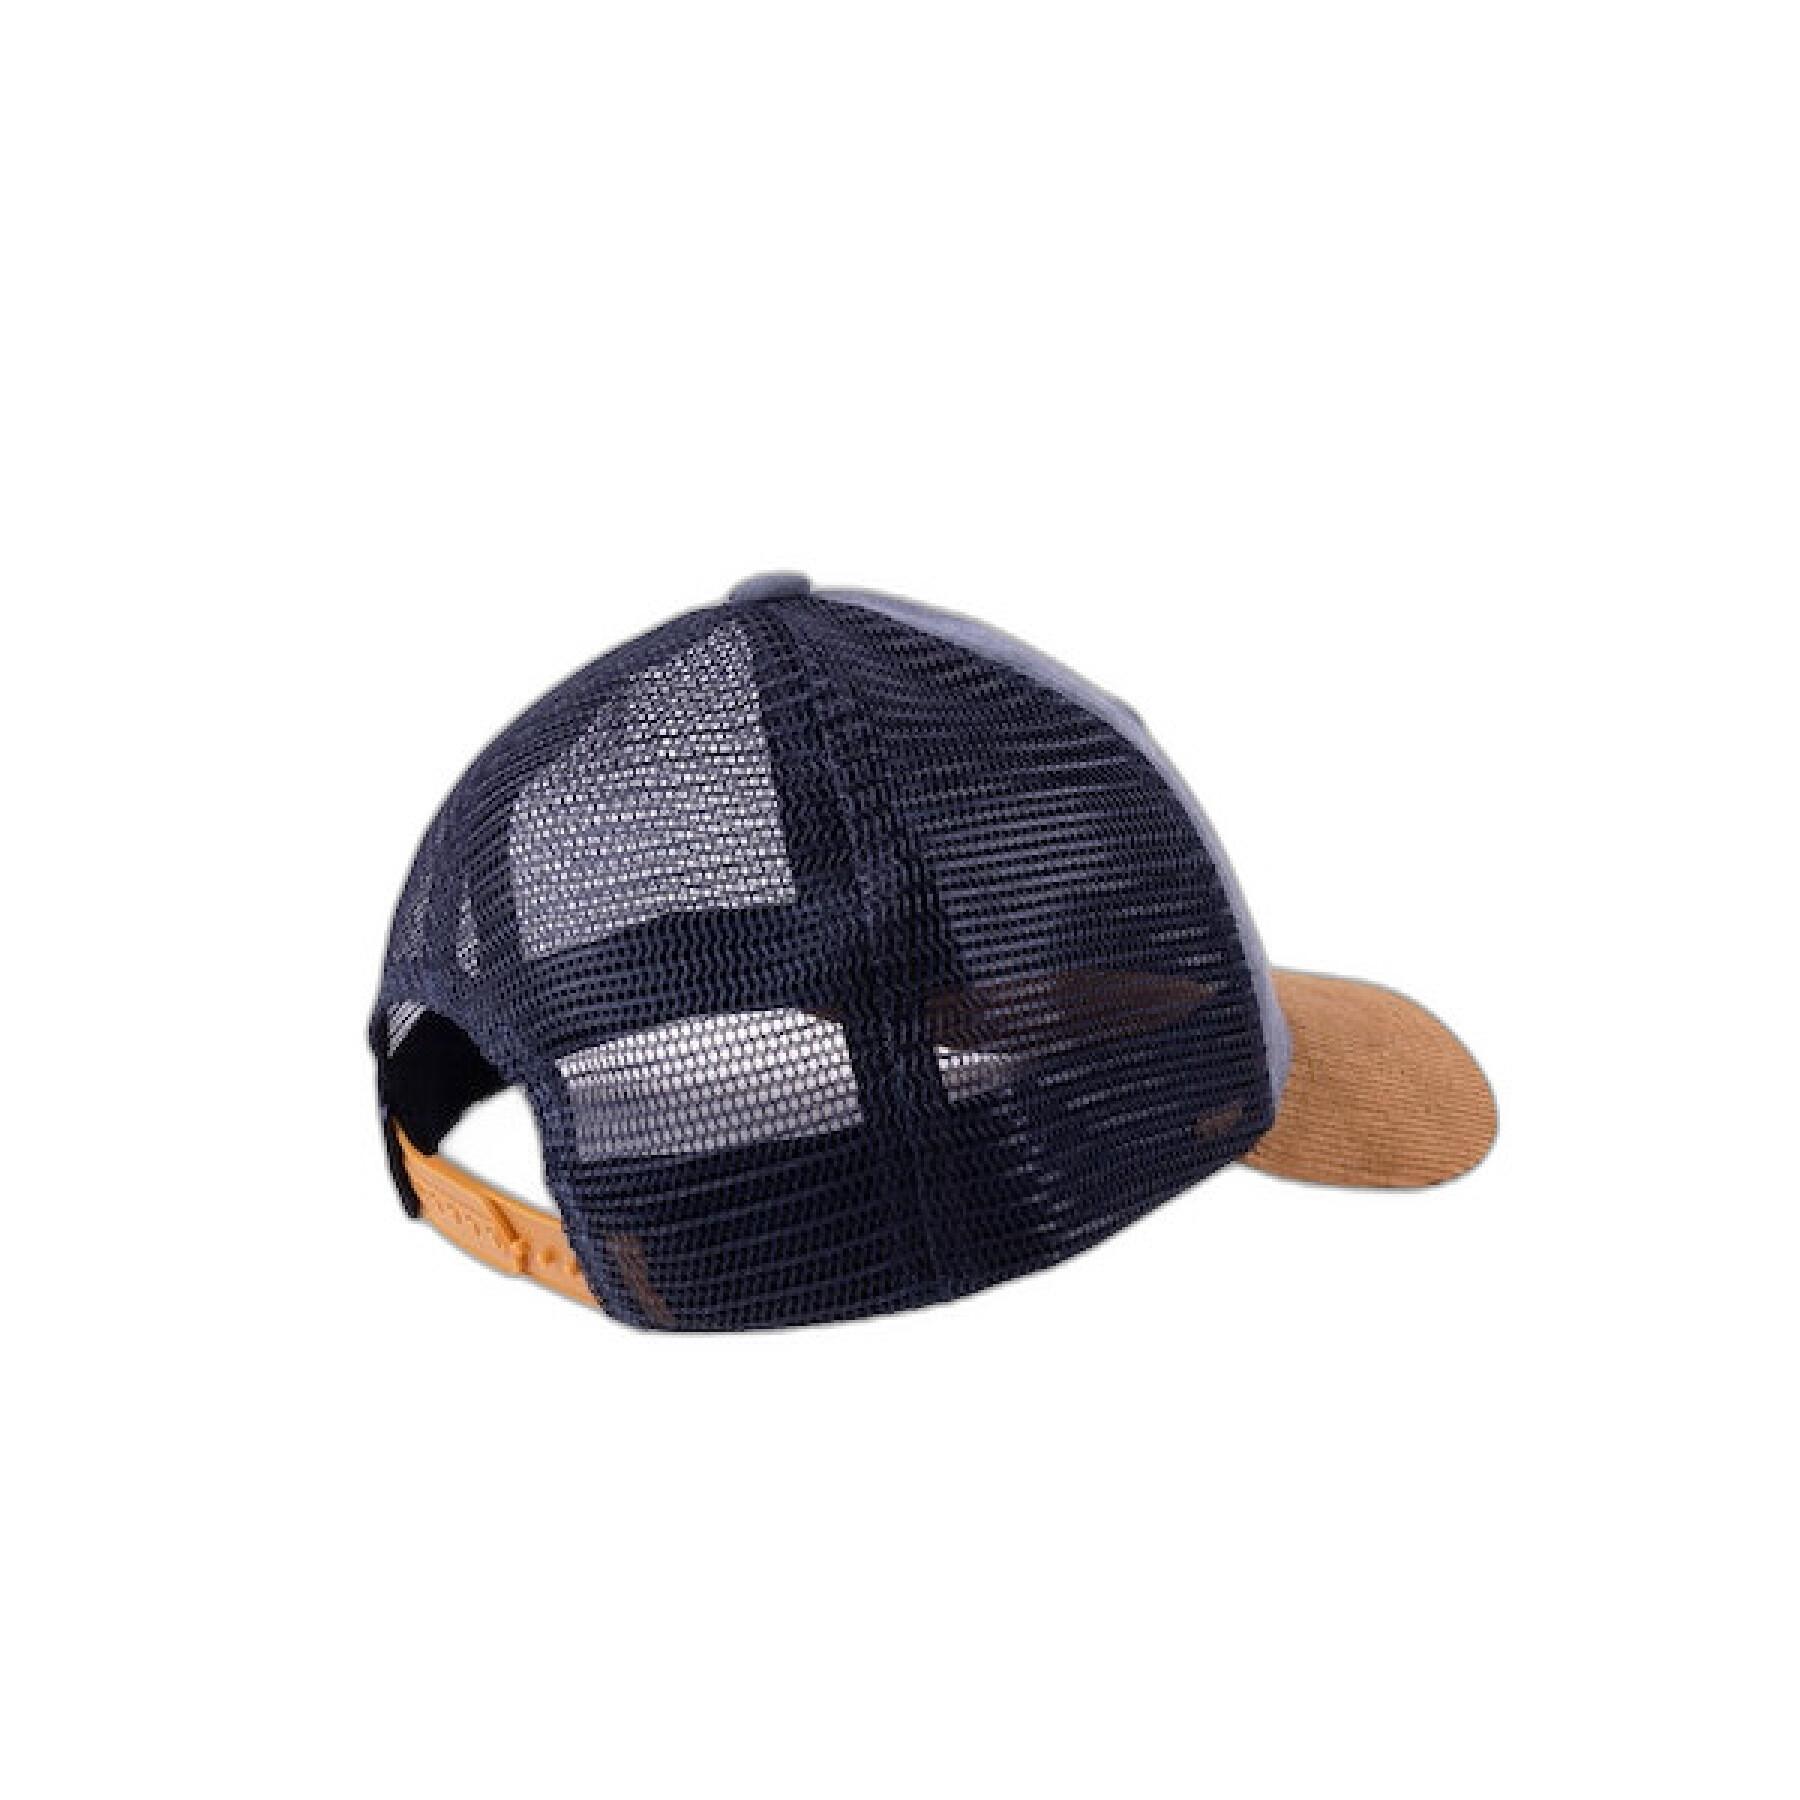 Casquette laine polyester Faguo